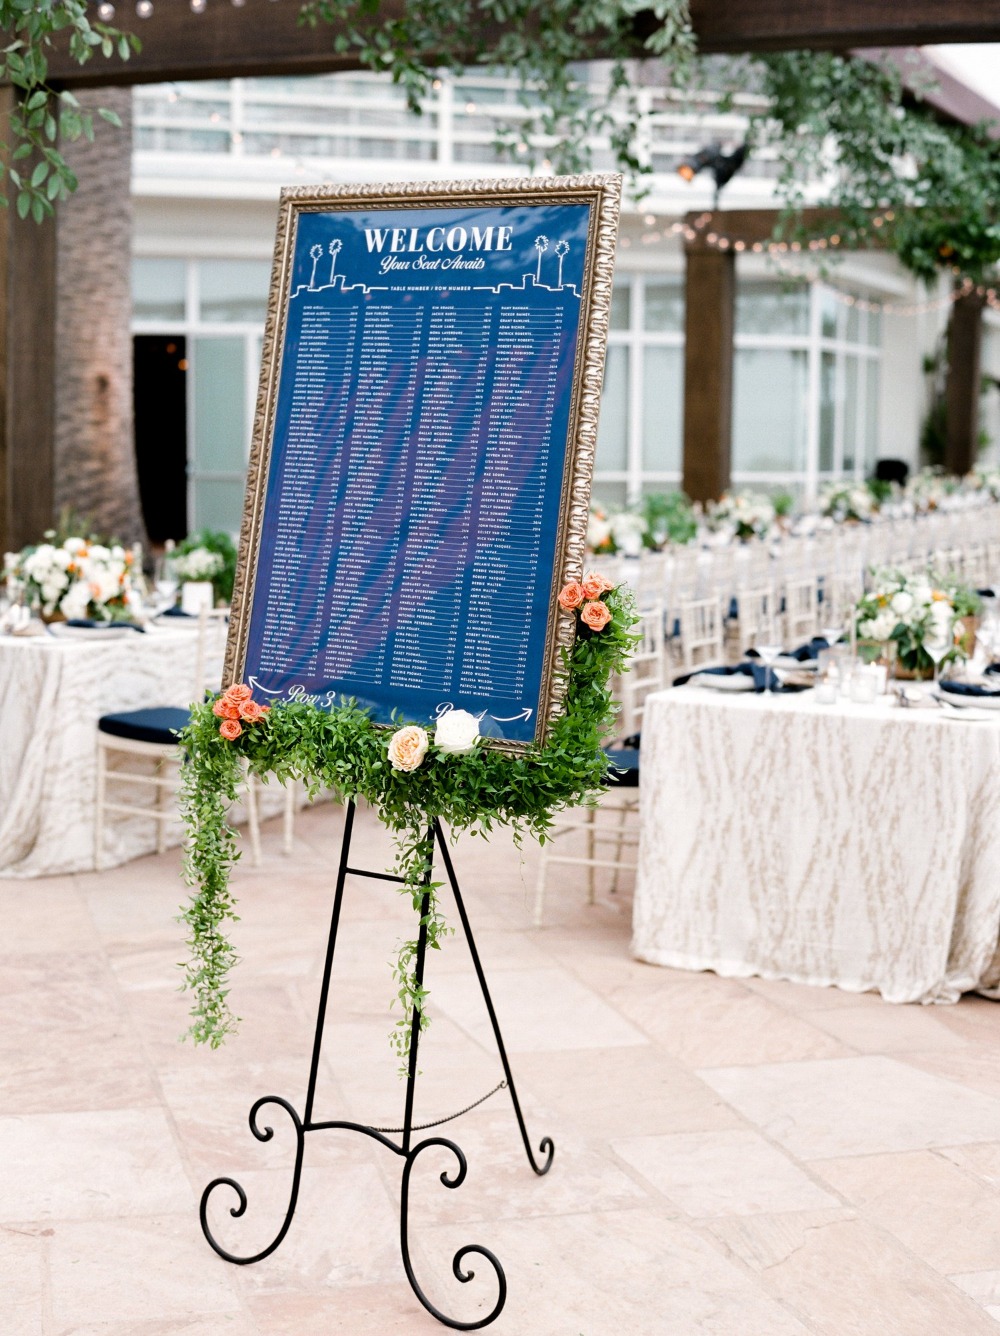 Reception seating chart